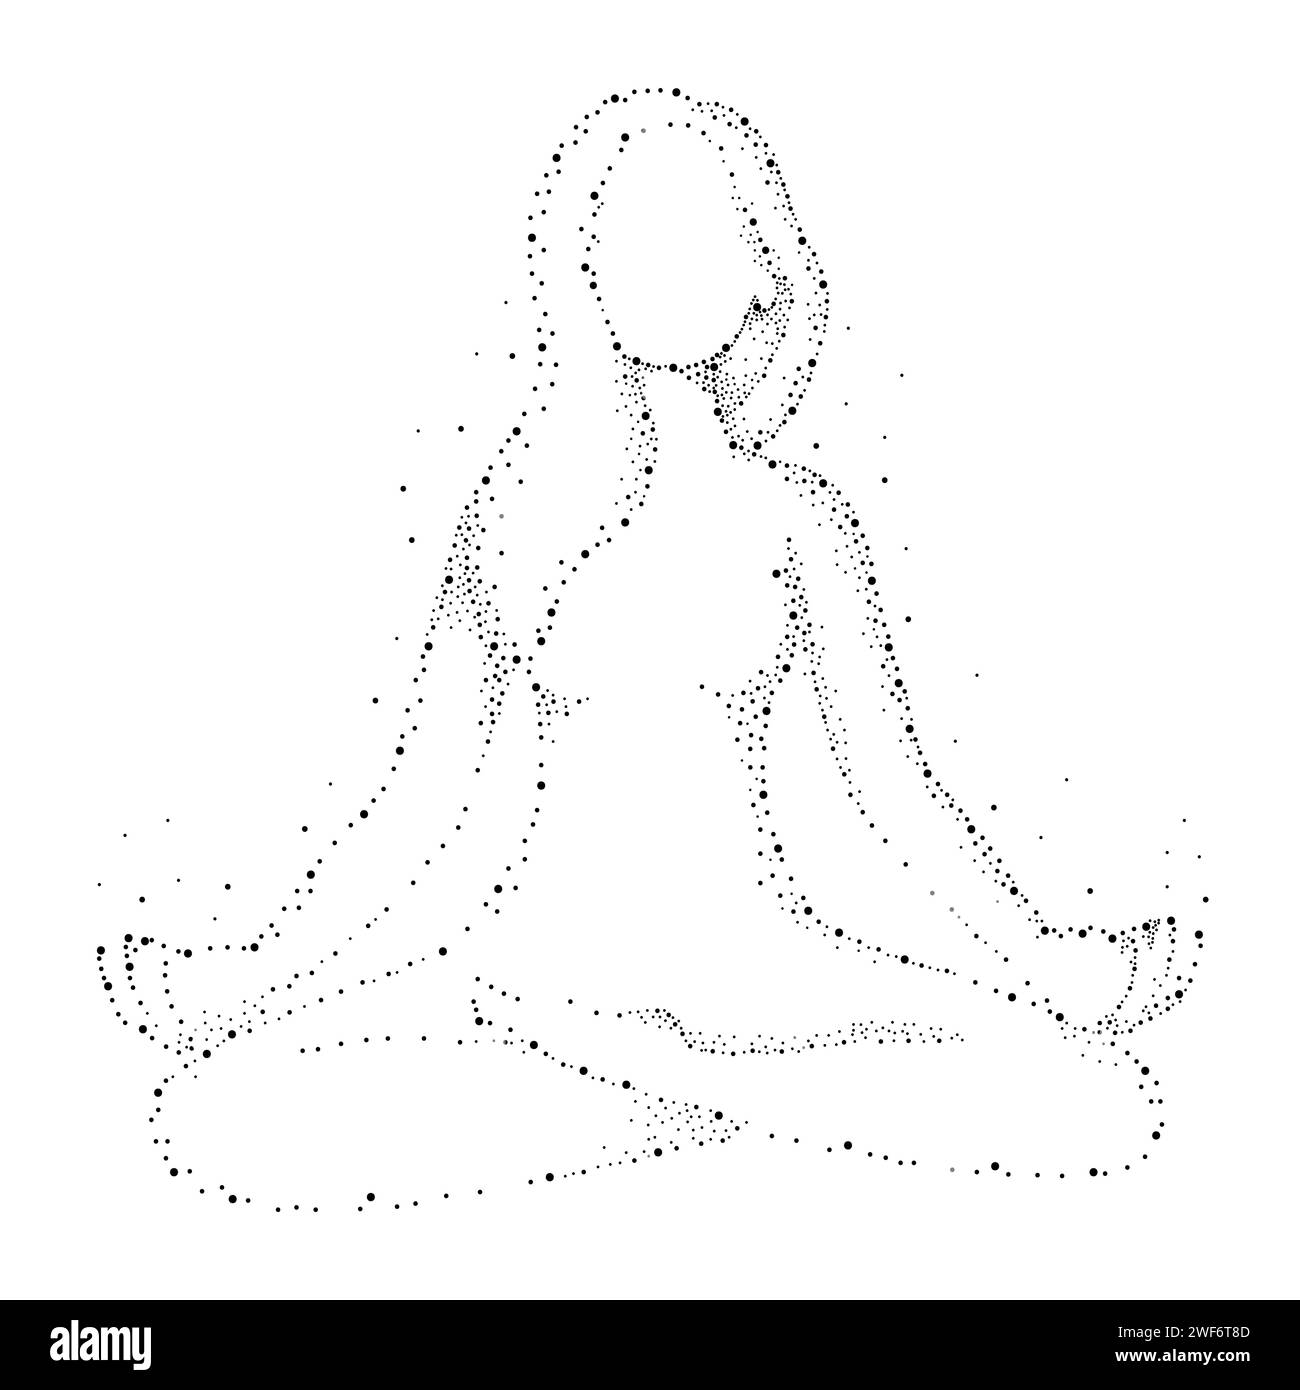 Particles of female figure meditating, vector illustration Stock Vector